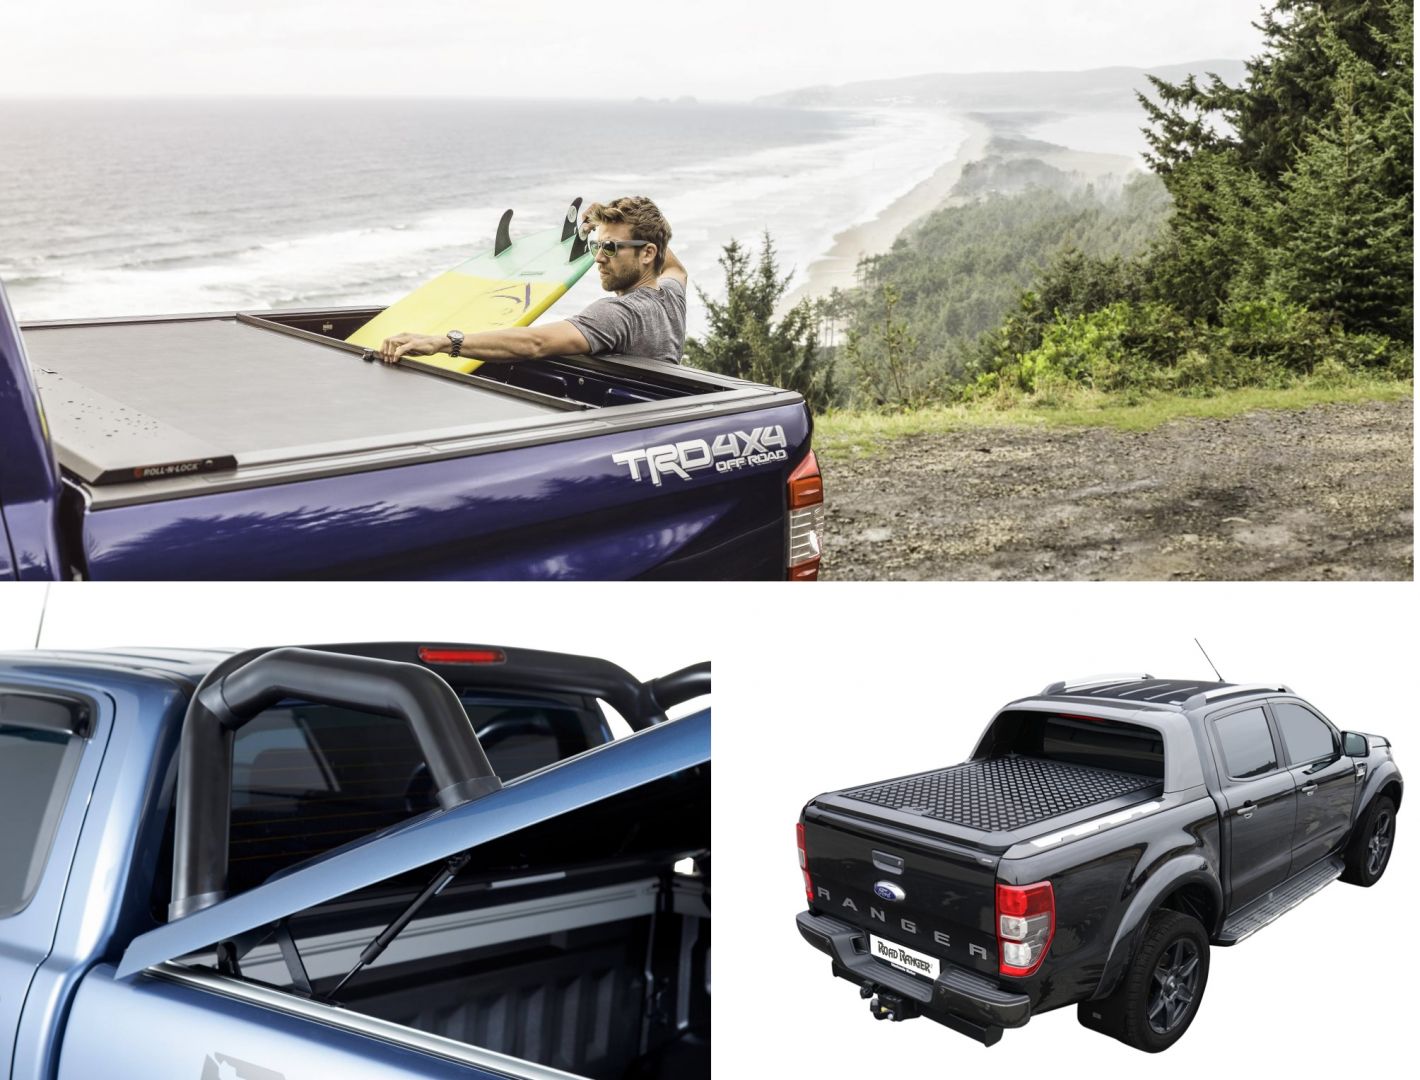 All truck bed covers for the Ford Ranger